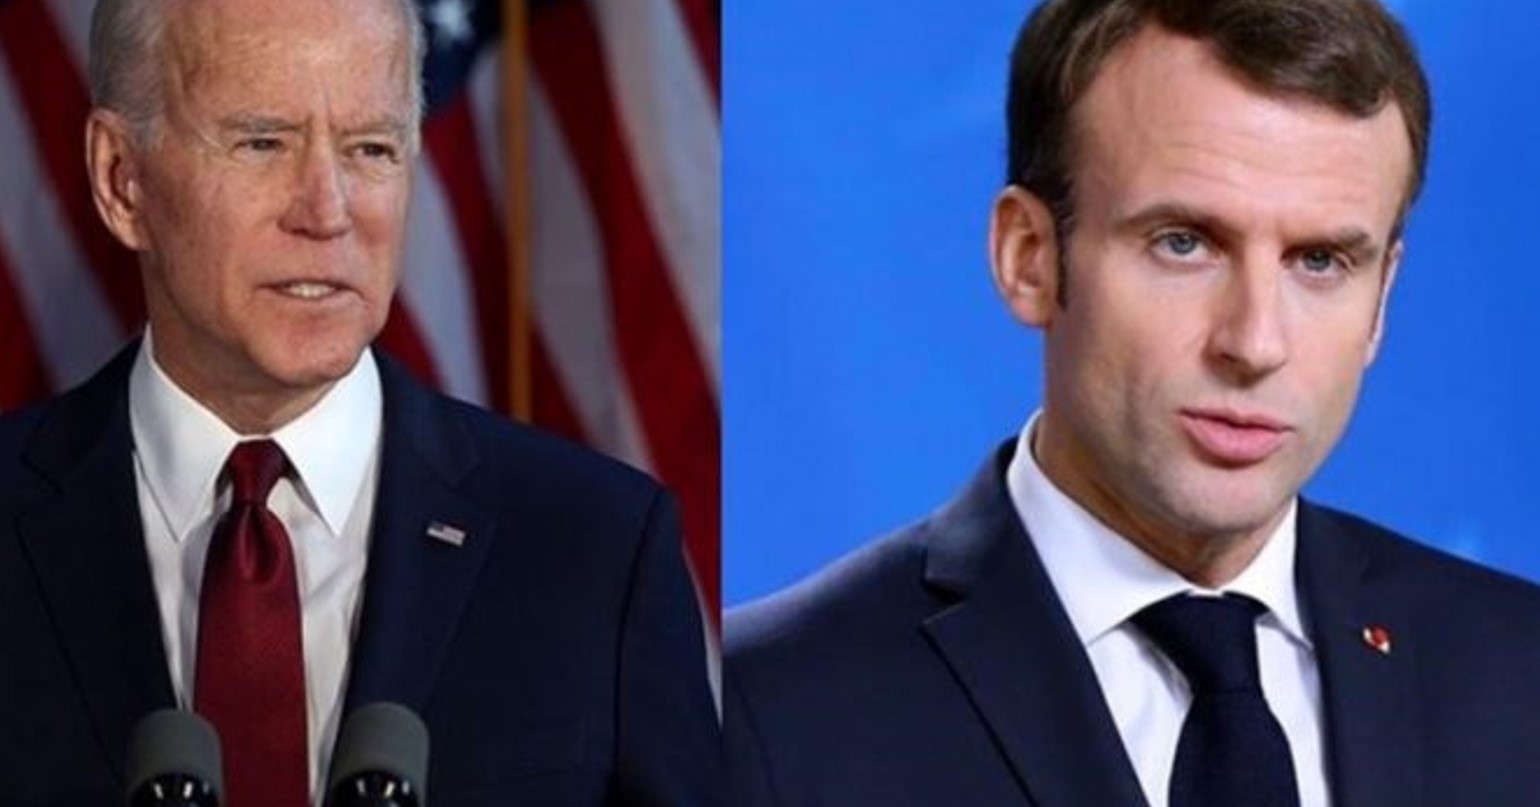 Biden invited Macron to discuss Australia's withdrawal from the submarine agreement